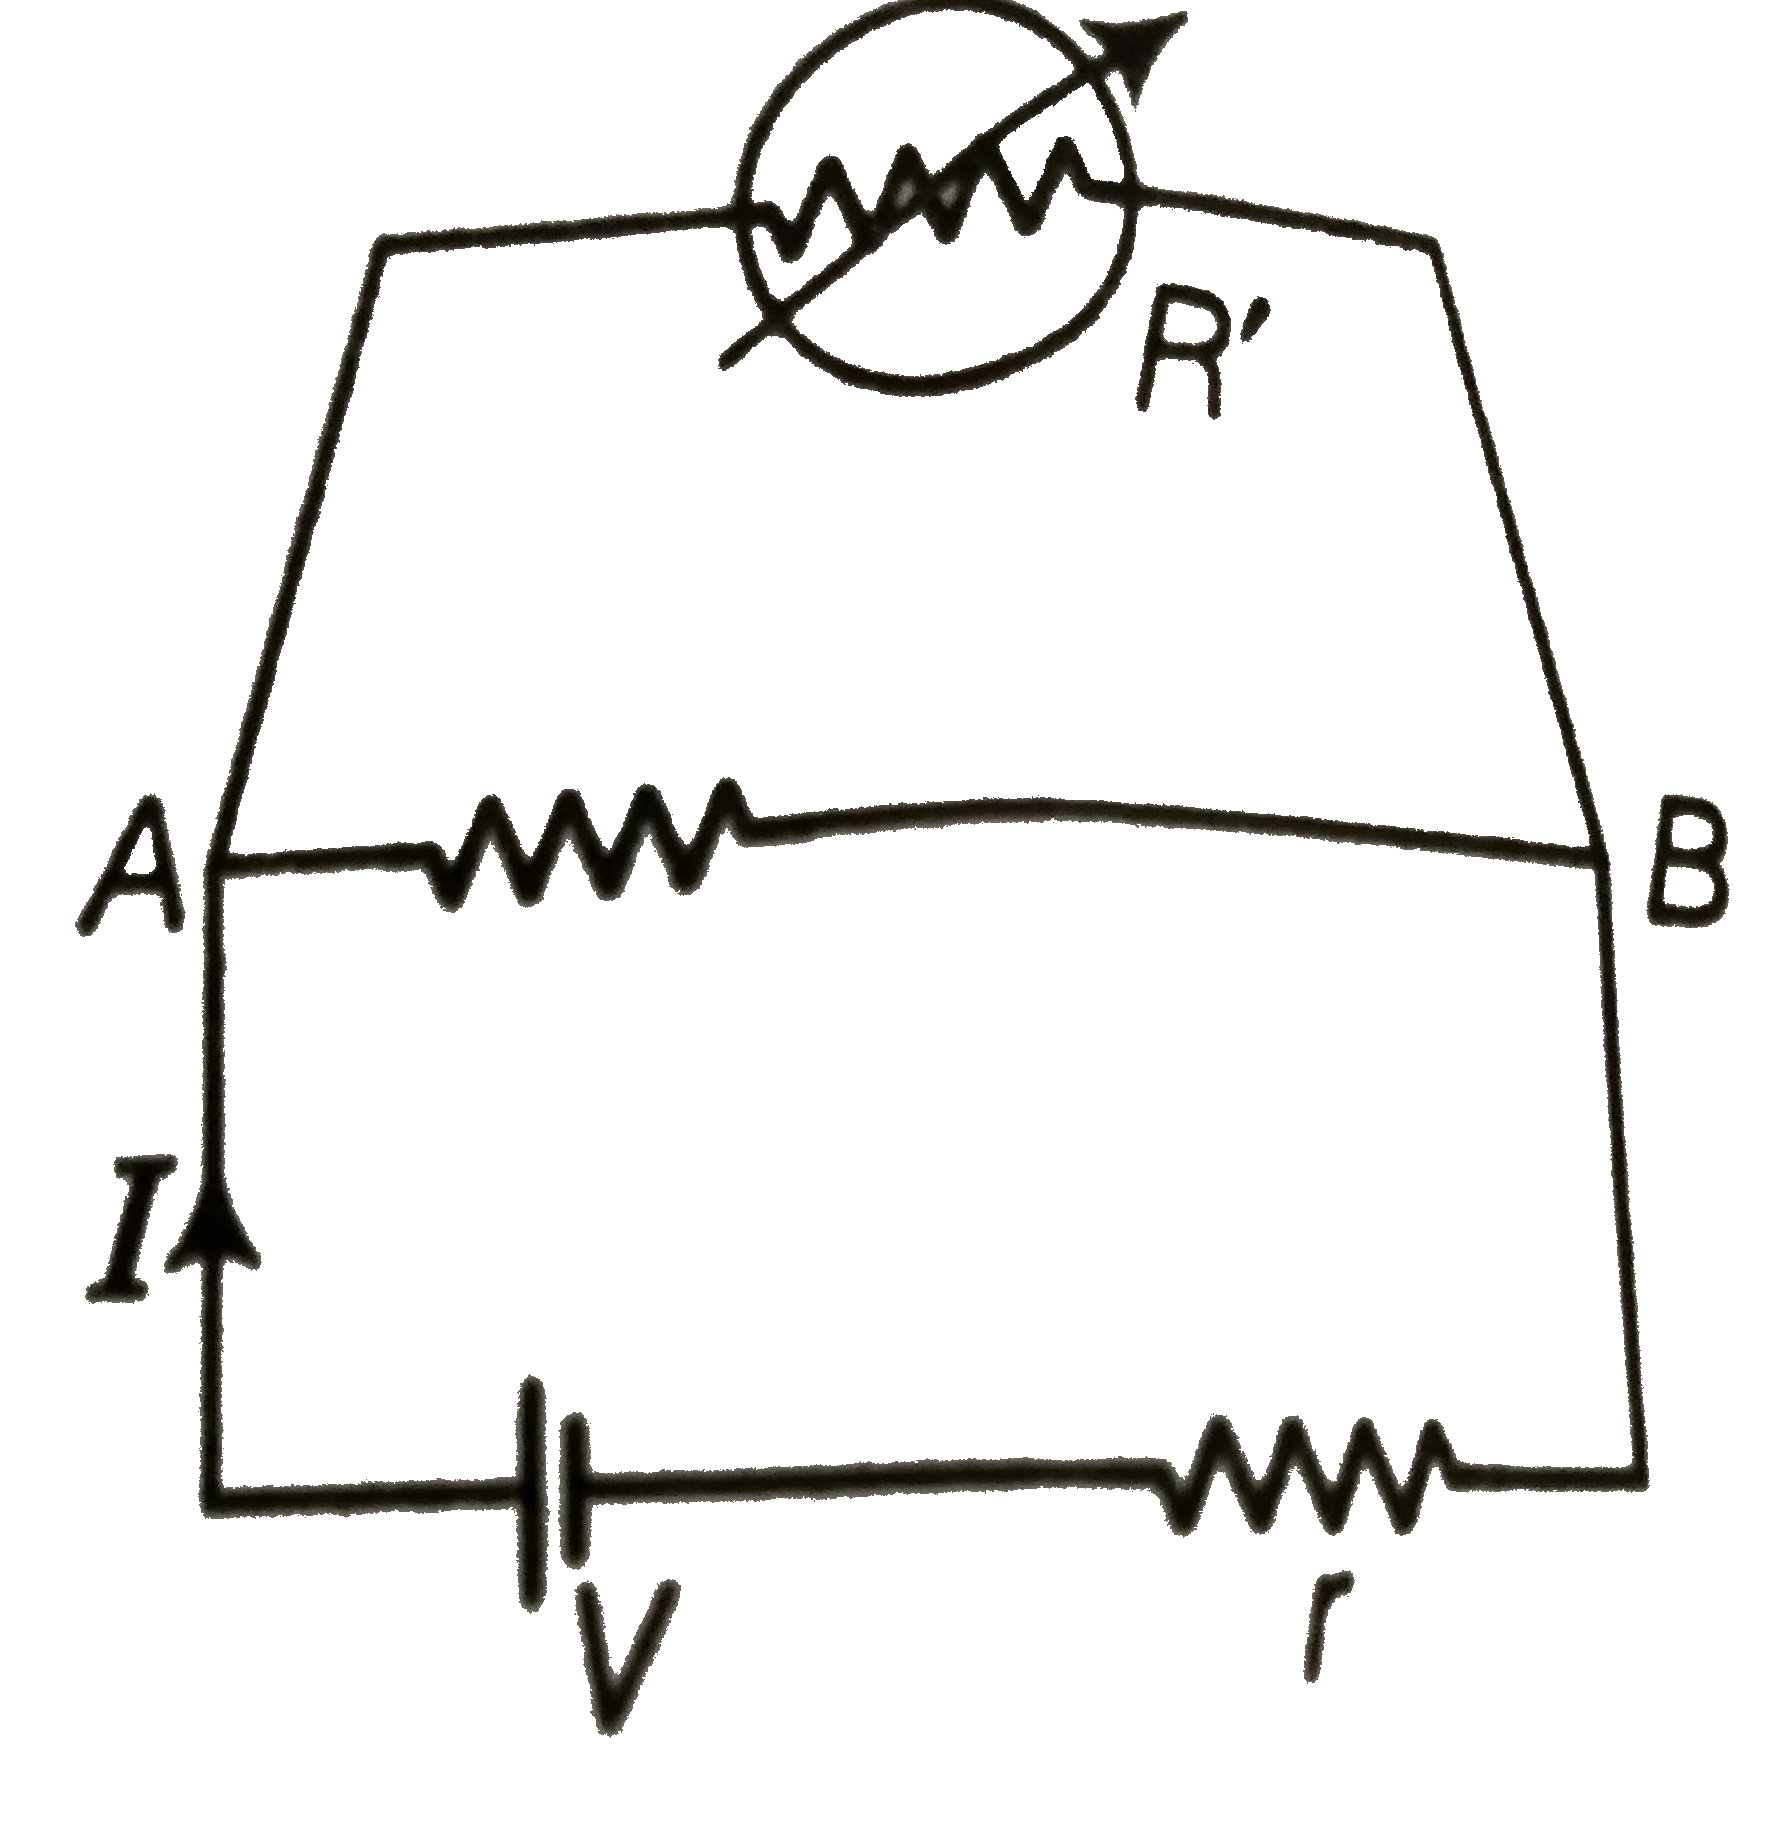 Consider a simple circuit shown in figure stands for a variable resistance R'.R' can vary from R(0) to infinity. R is internal resistance of the battery (r lt lt R lt lt R).